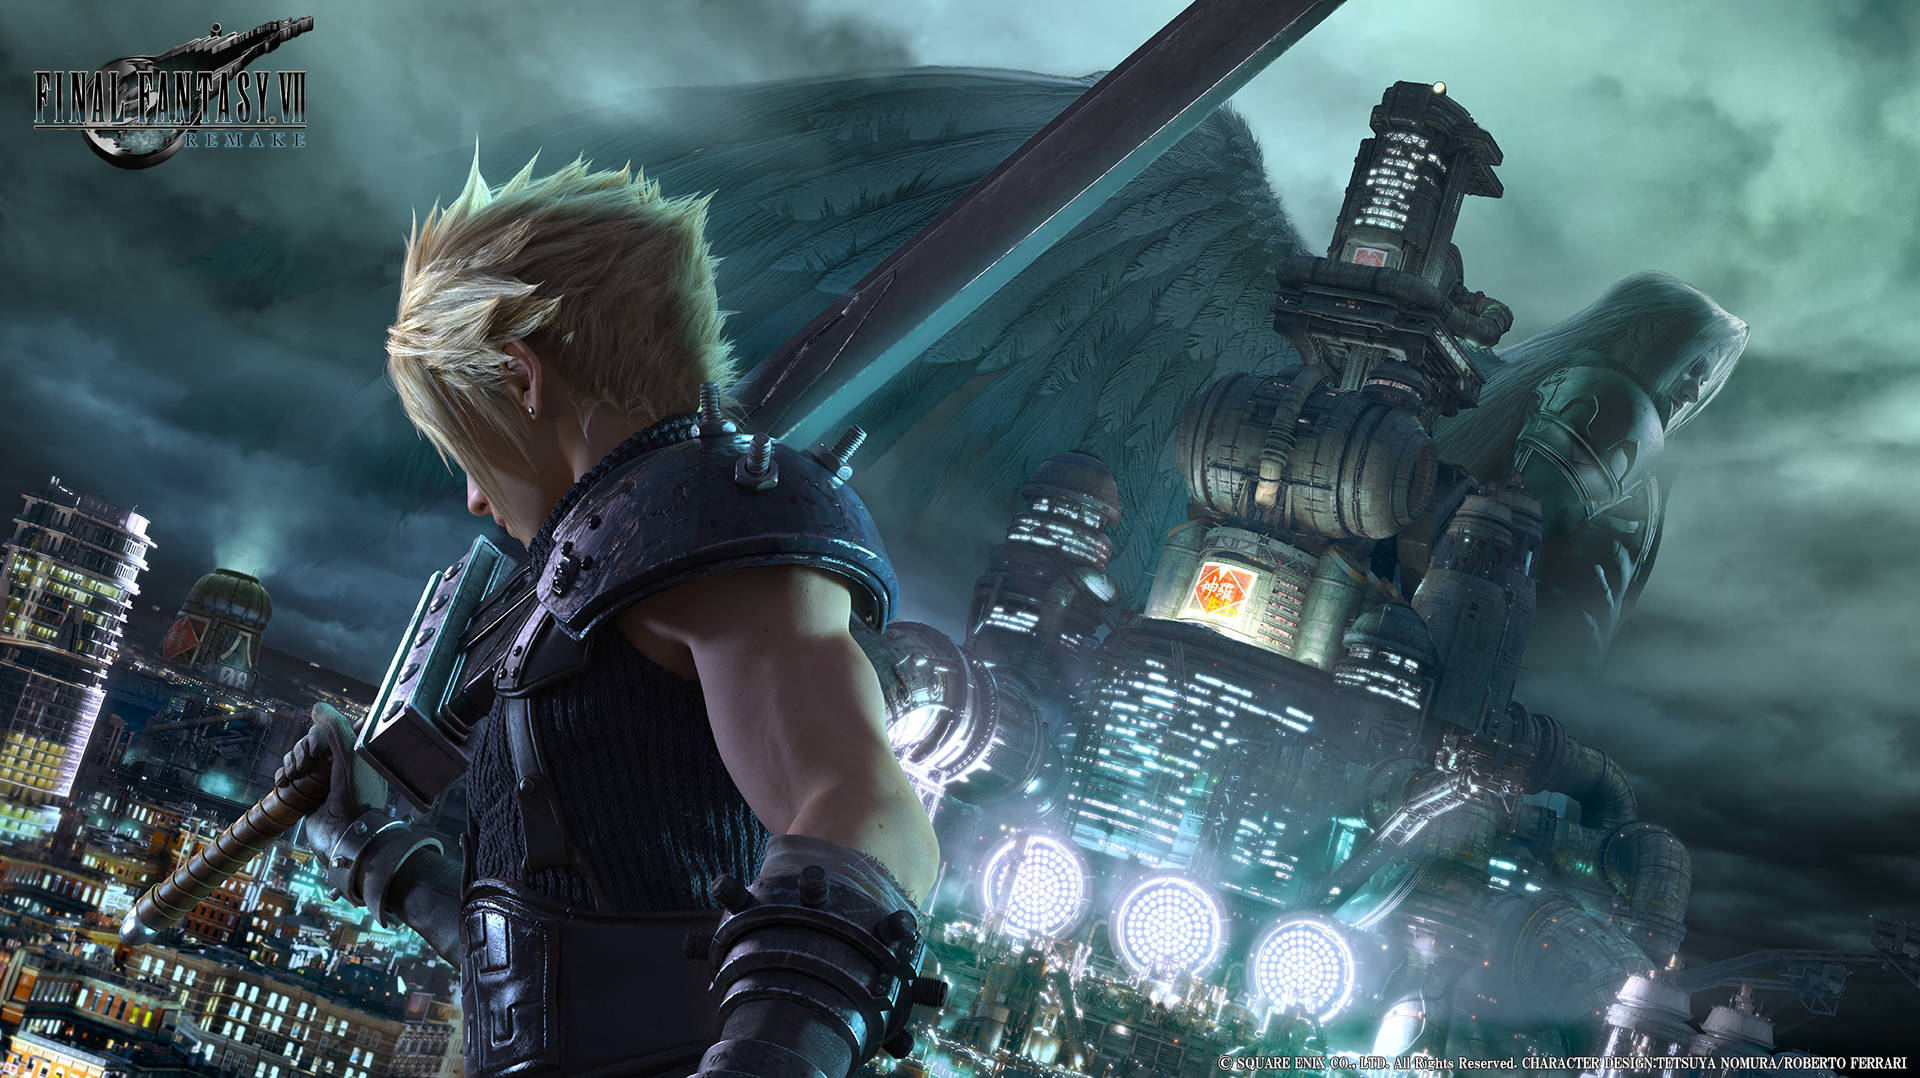 160+ Final Fantasy HD Wallpapers and Backgrounds